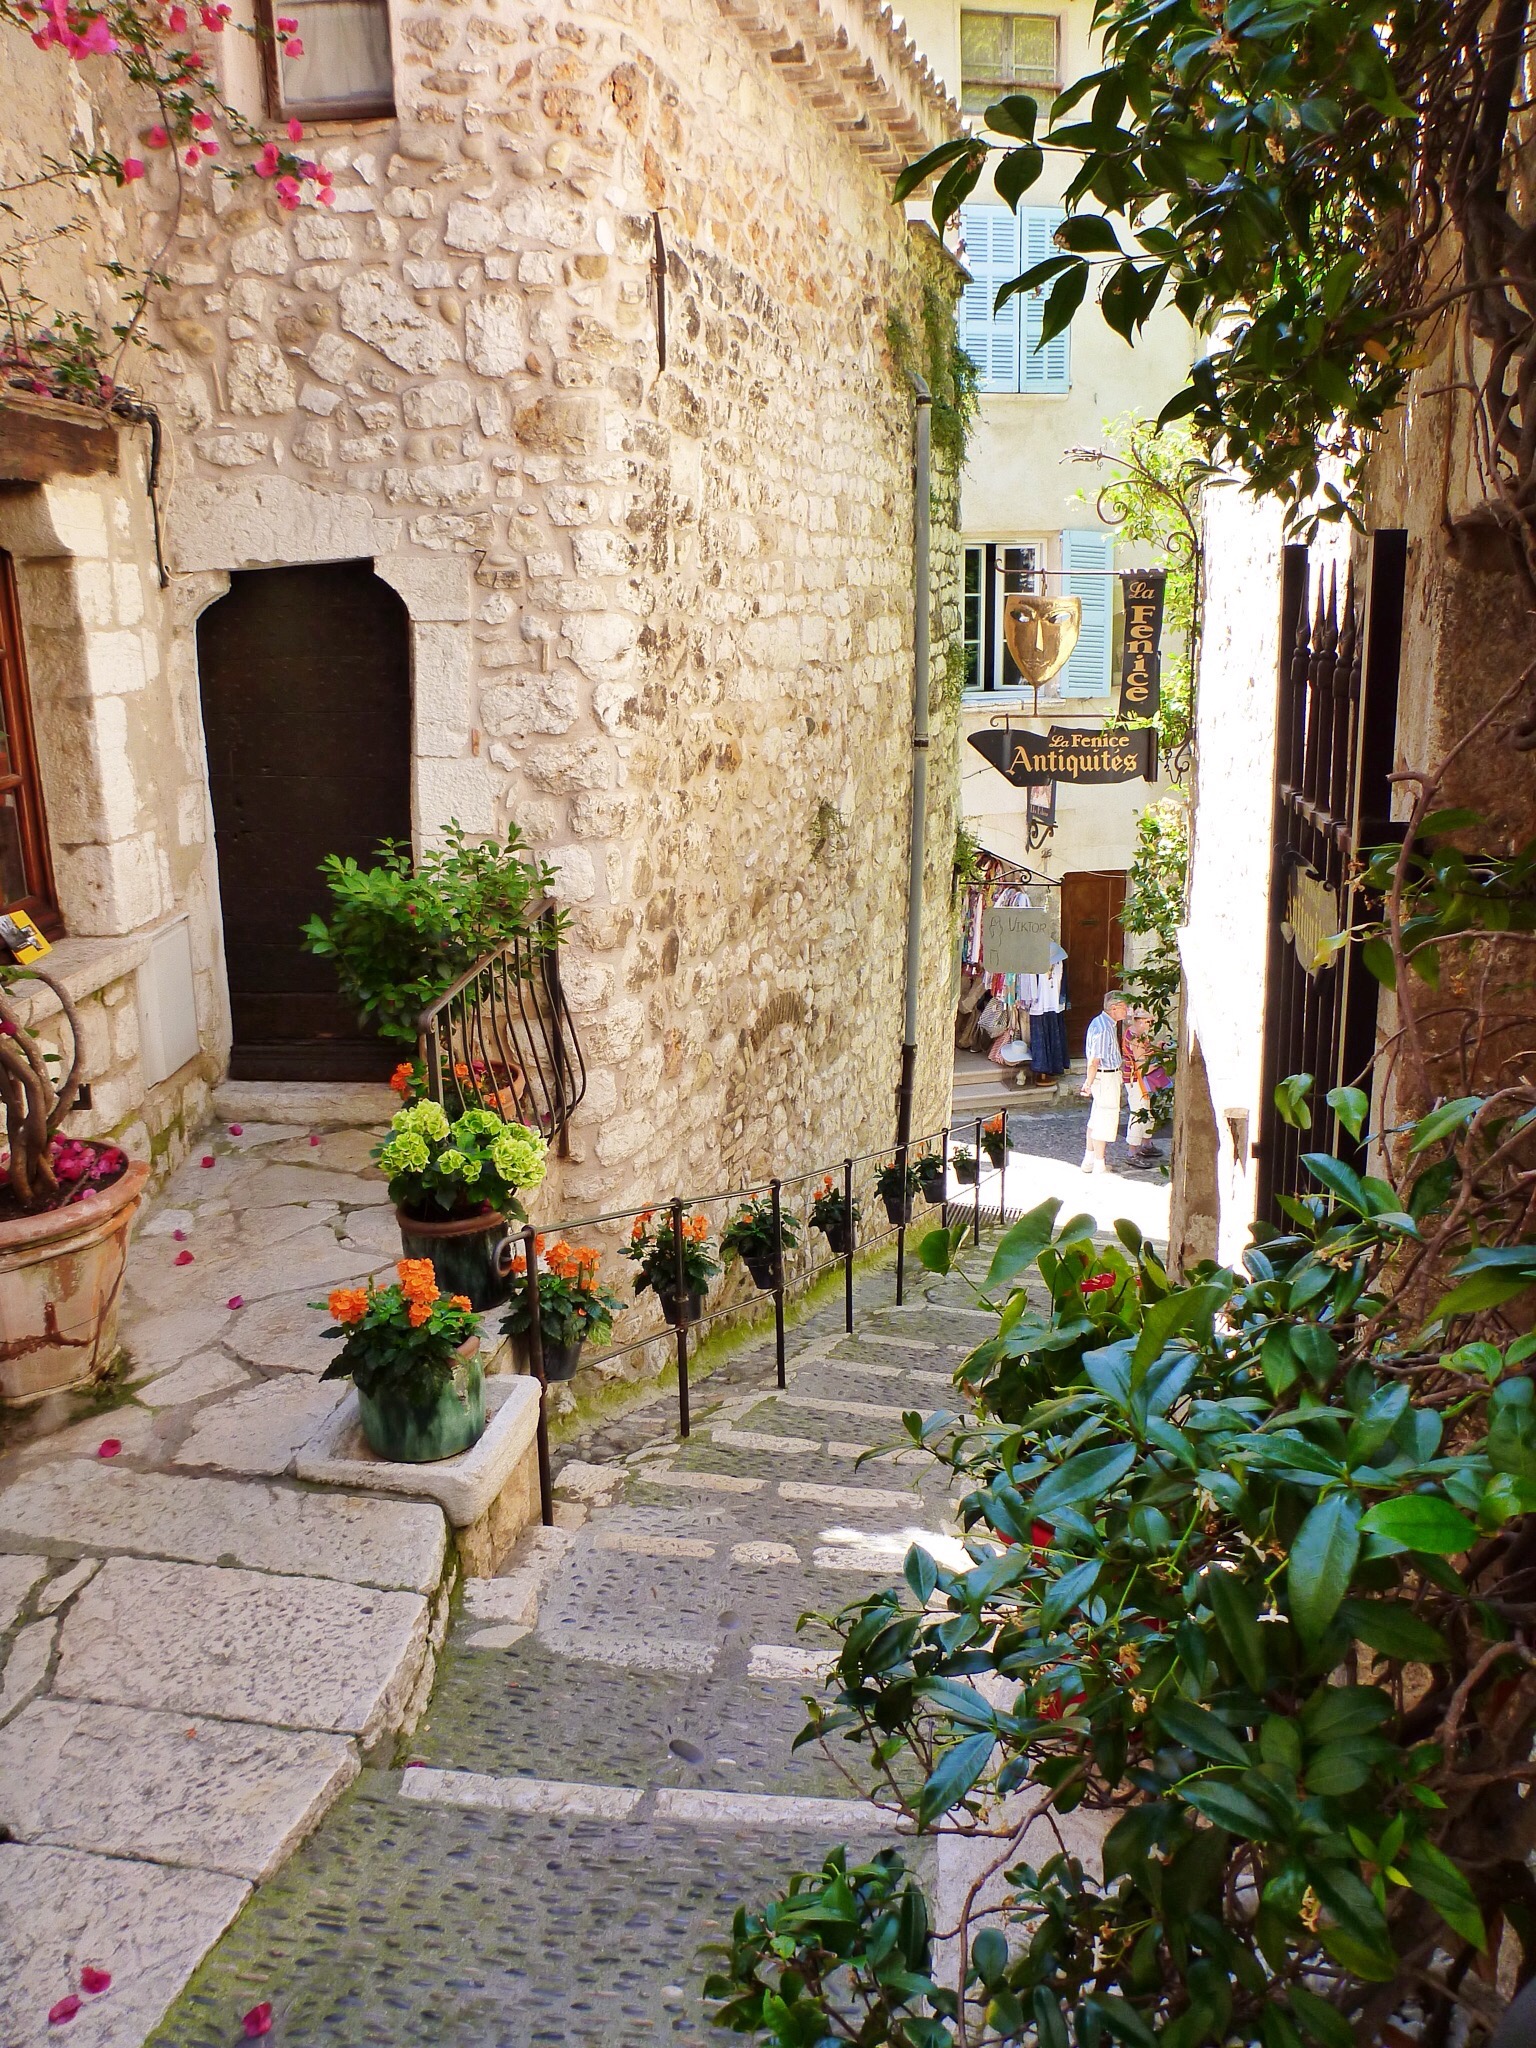 Another Staircase - St. Paul de Vence - Côte d'Azur - South of France (French Riviera)